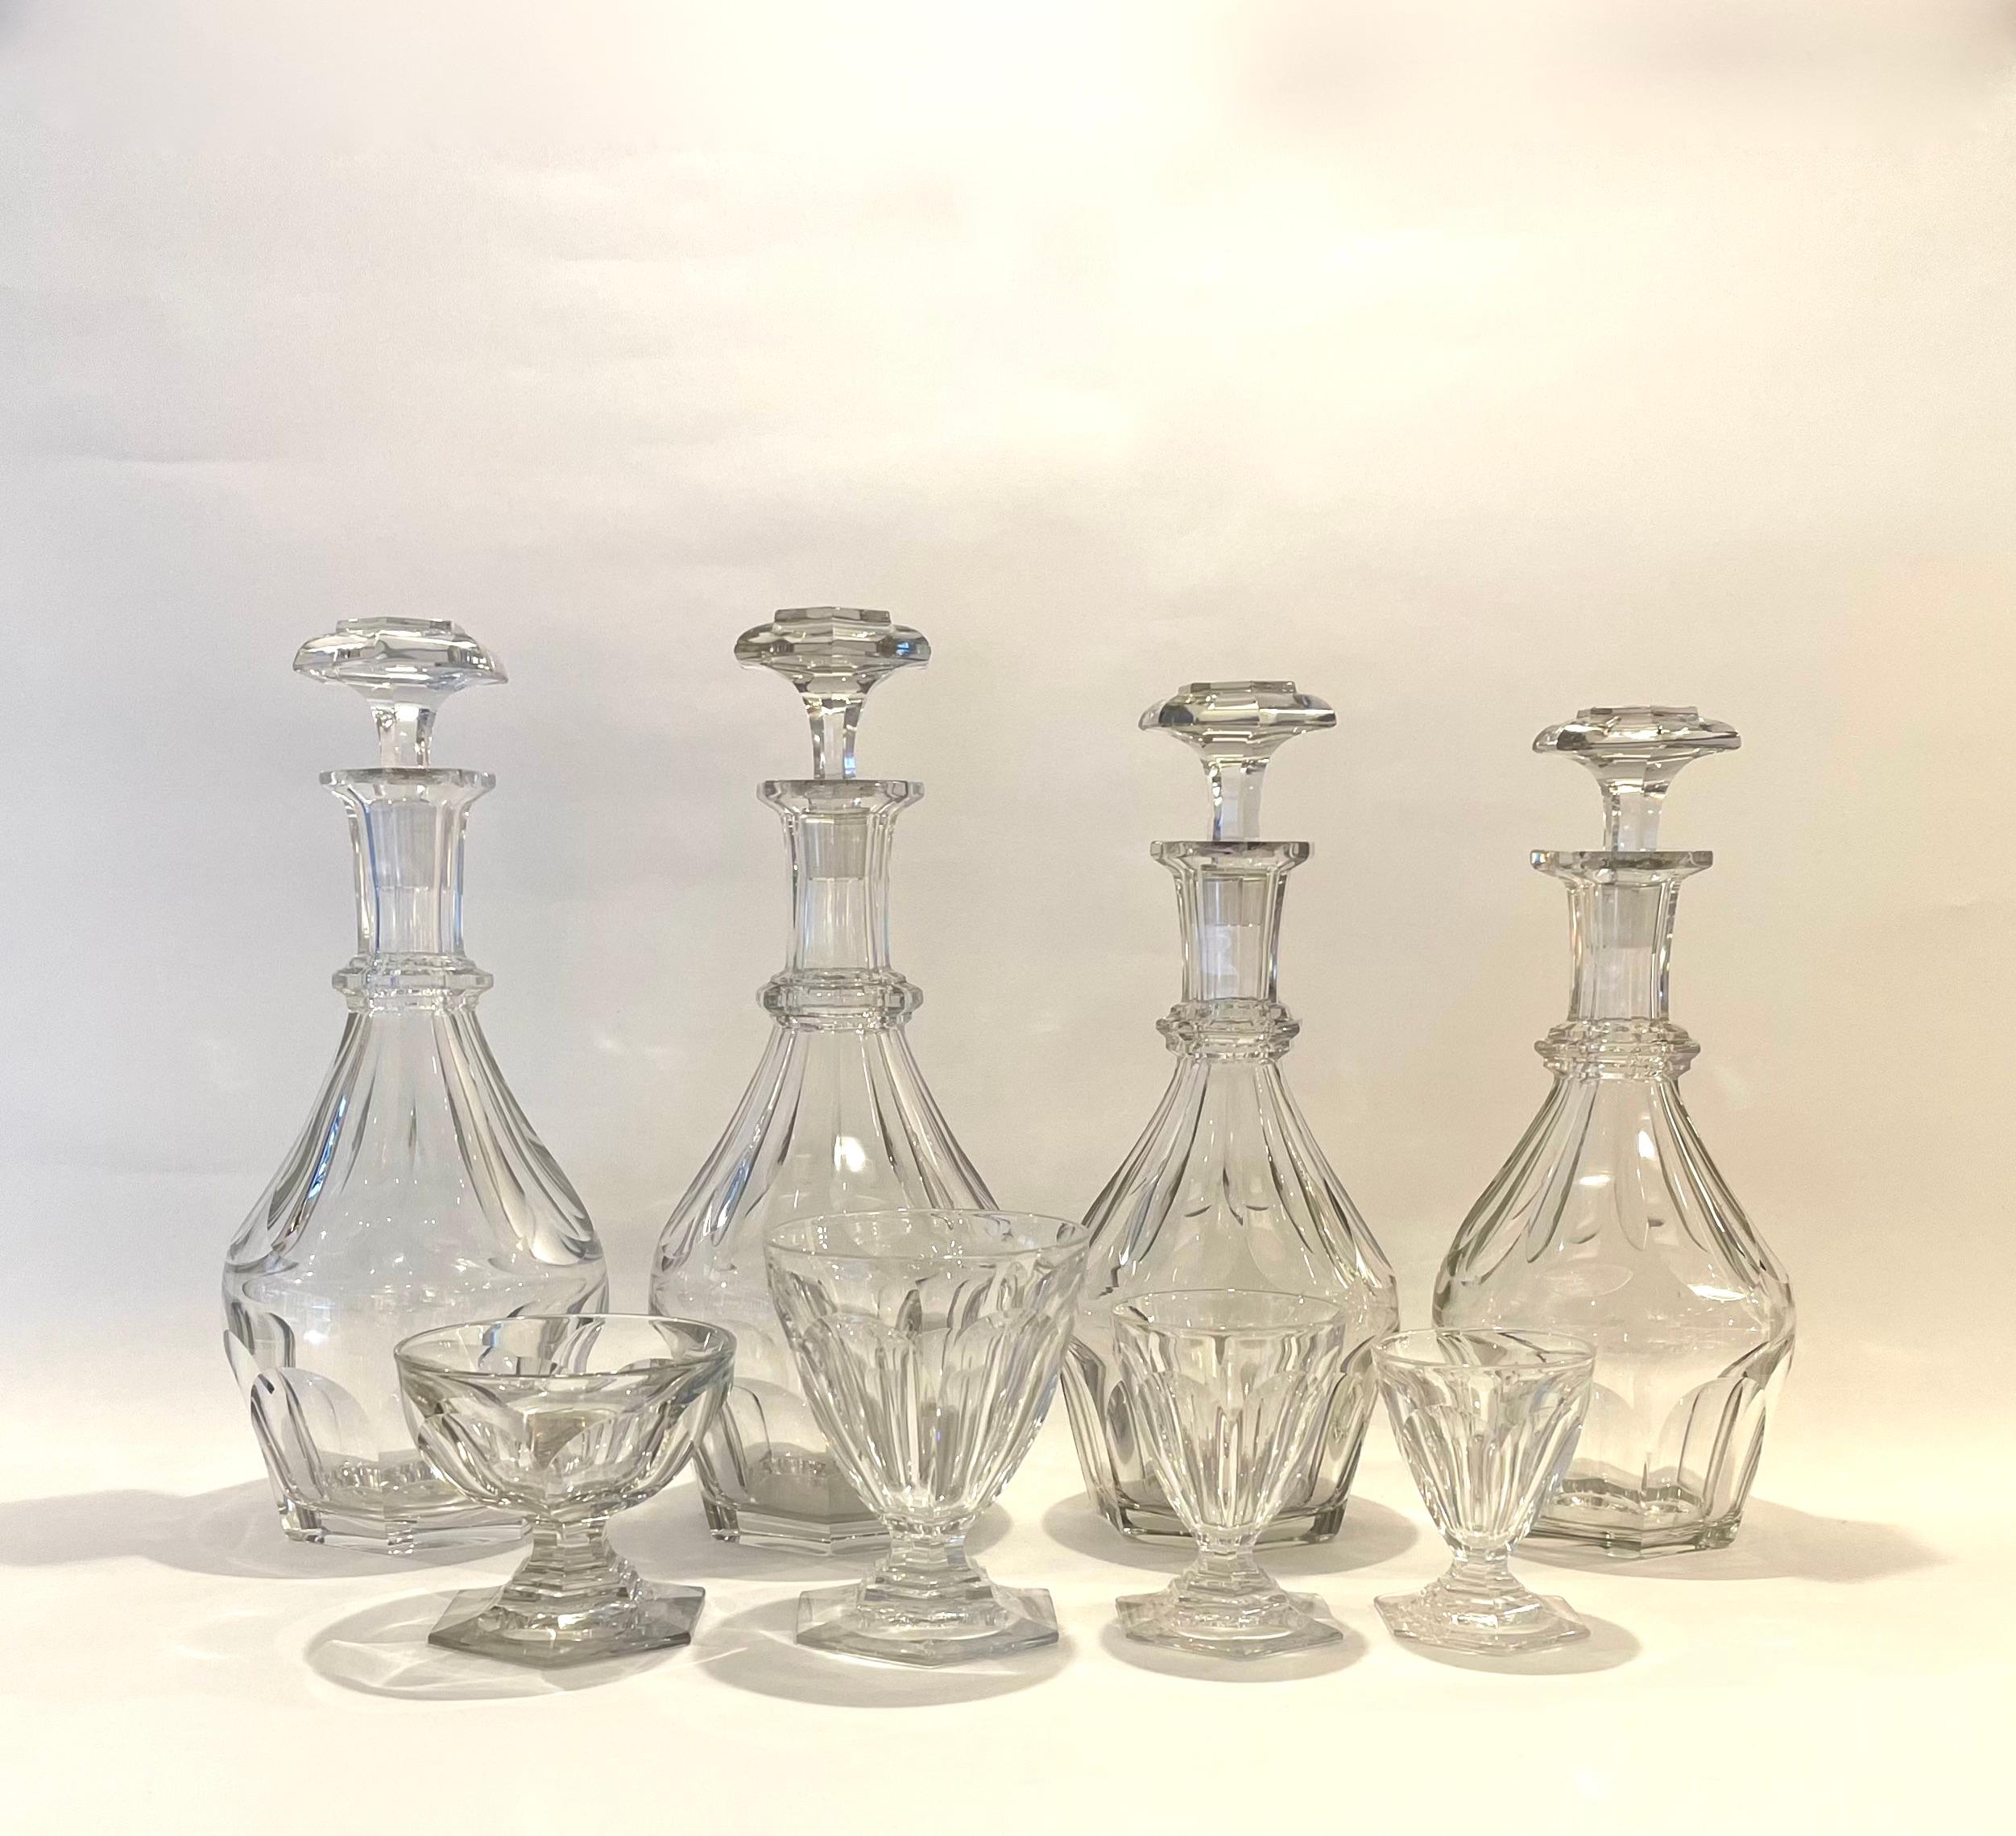 52 Piece of Baccarat Crystal Stemware with Decanters model Bourbon' For Sale 1